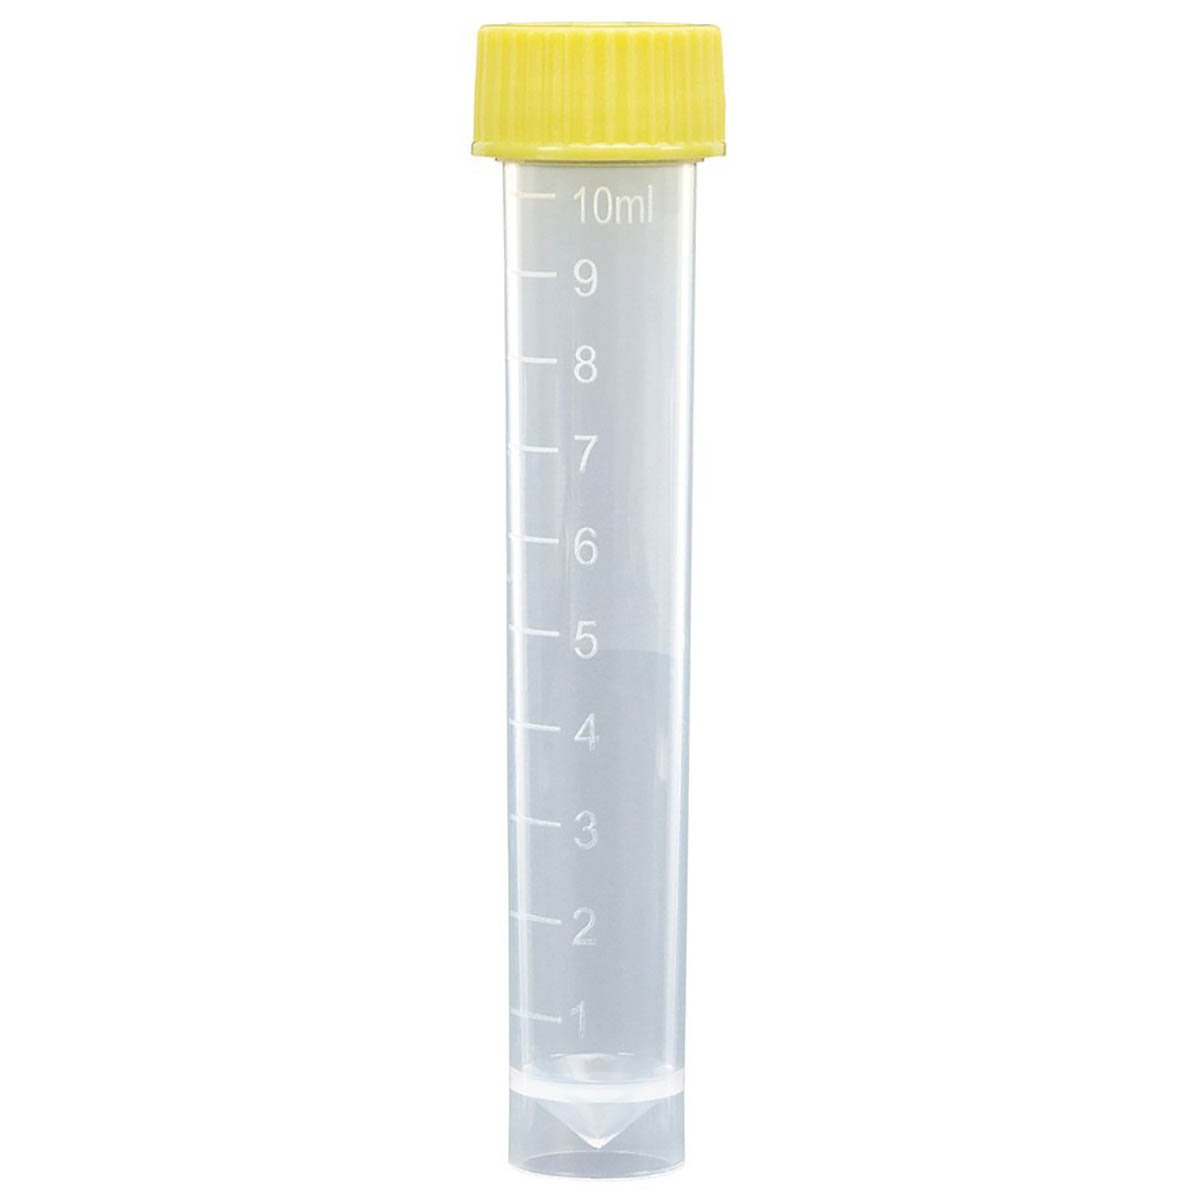 Transport Tubes 10mL - PP Self-Standing Conical Bottom with Unassembled PE Yellow Screw Cap (Case of 1000)